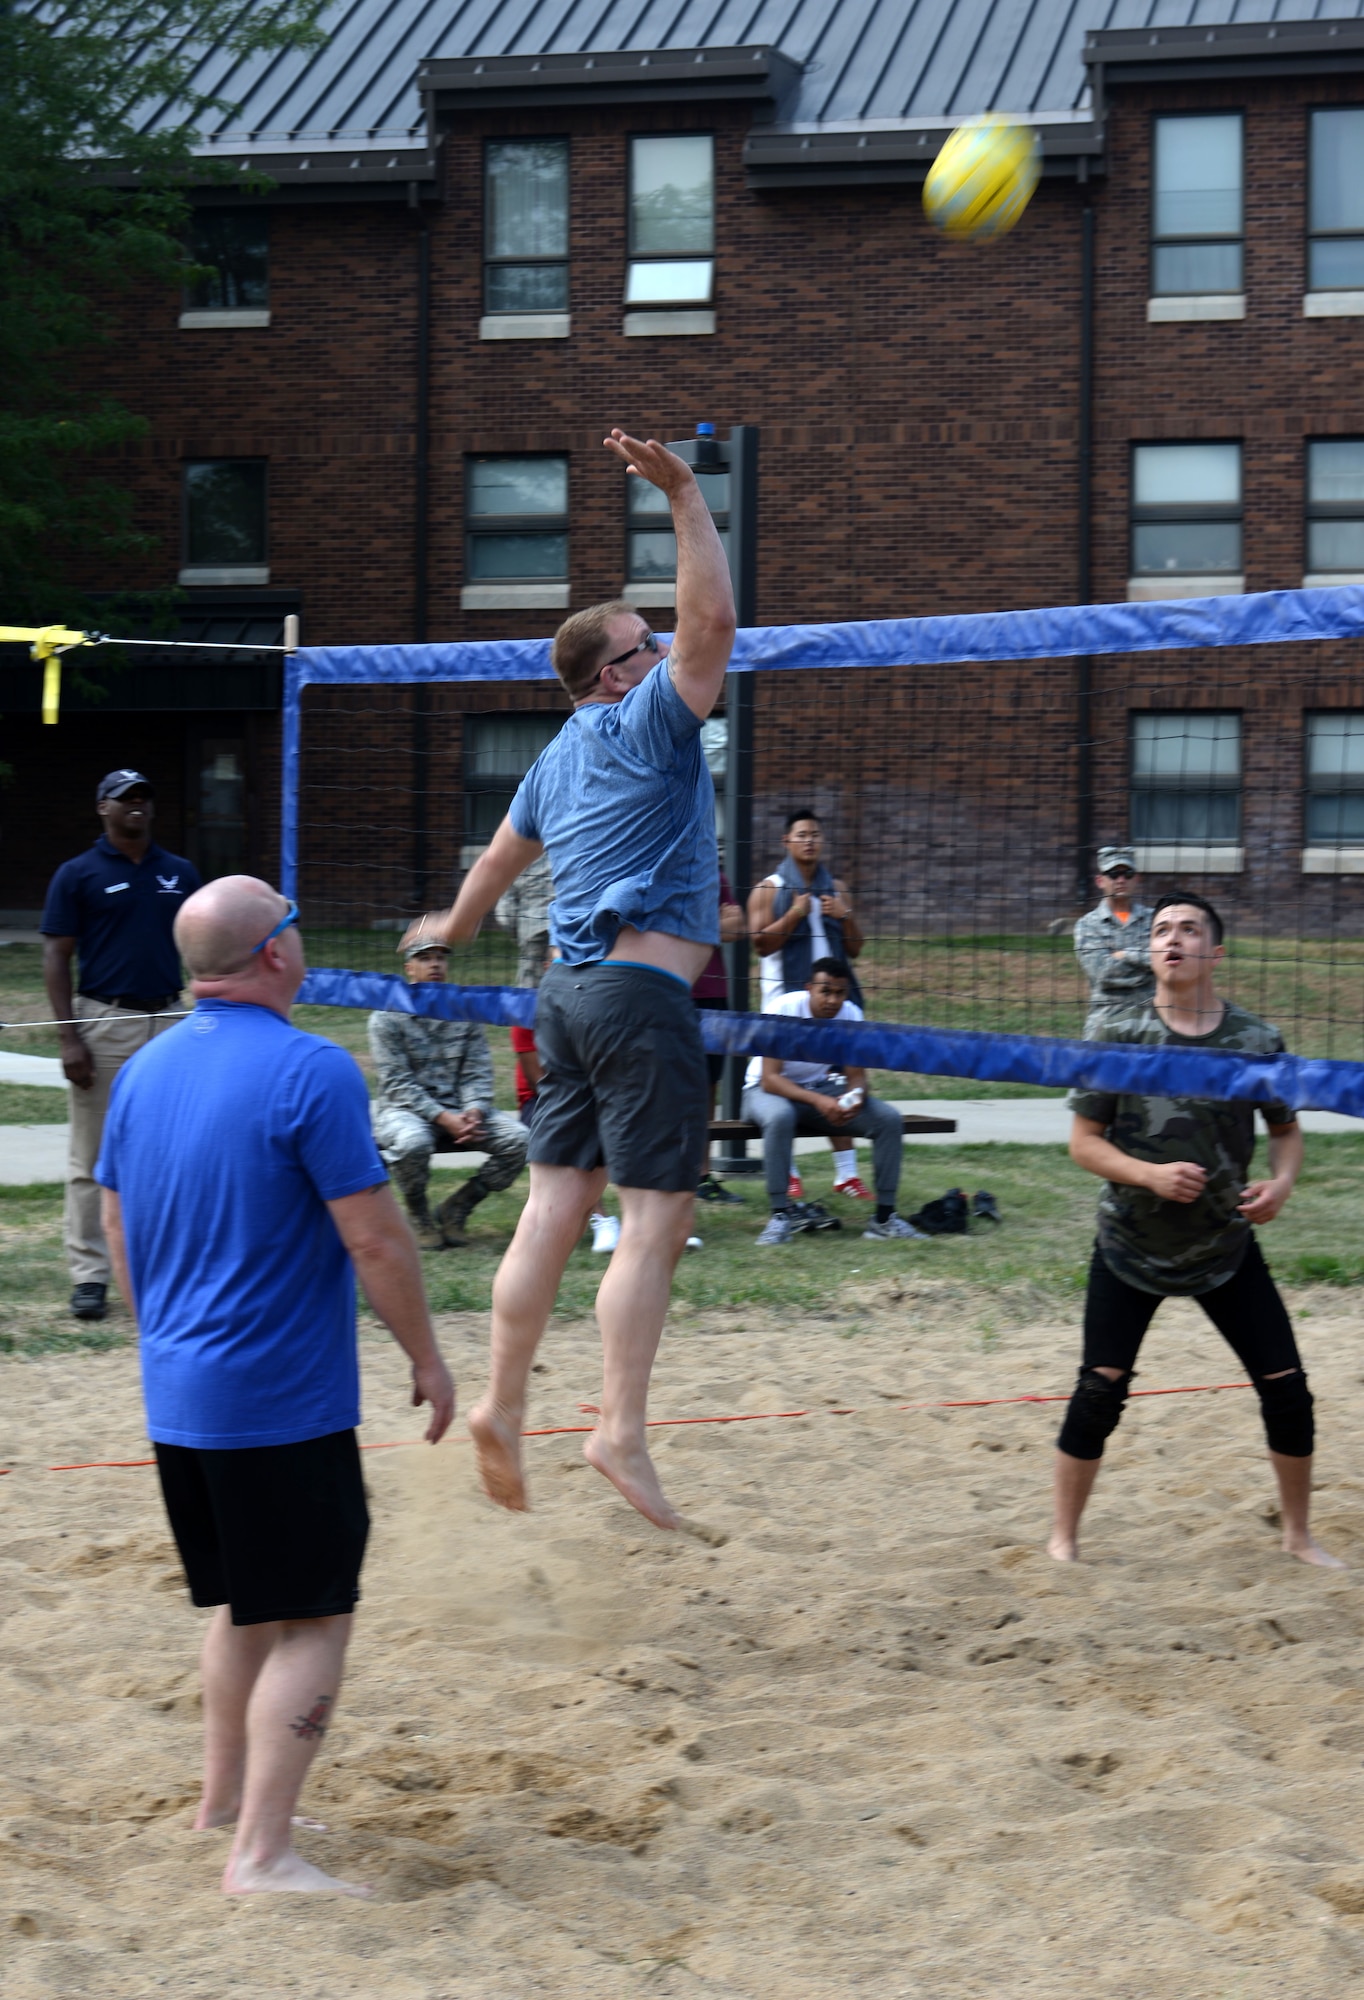 CMSgt. Adam Vizi, the 28th Bomb Wing command chief, hits a volleyball over a net Aug. 25, 2017 on Ellsworth Air Force Base, S.D. Wingmen Day included a base picnic called the Summer Bash where food and beverages were served and senior NCOs played a volley ball game against Airmen. (U.S. Air Force photo by Airman 1st Class Thomas Karol)